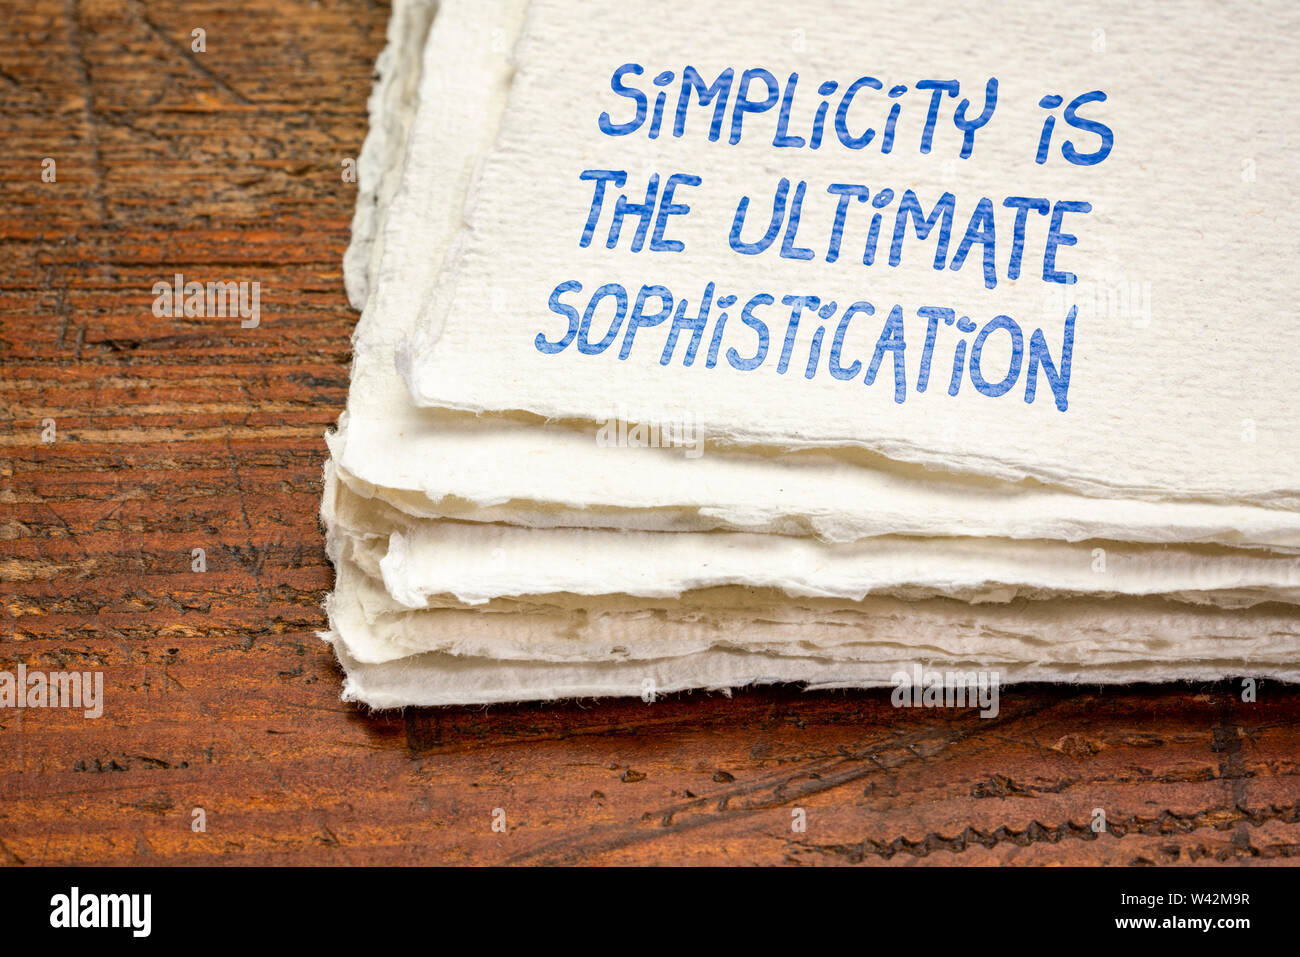 Simplicity is the ultimate sophistication - inspirational handwriting on a handmade rag paper Stock Photo